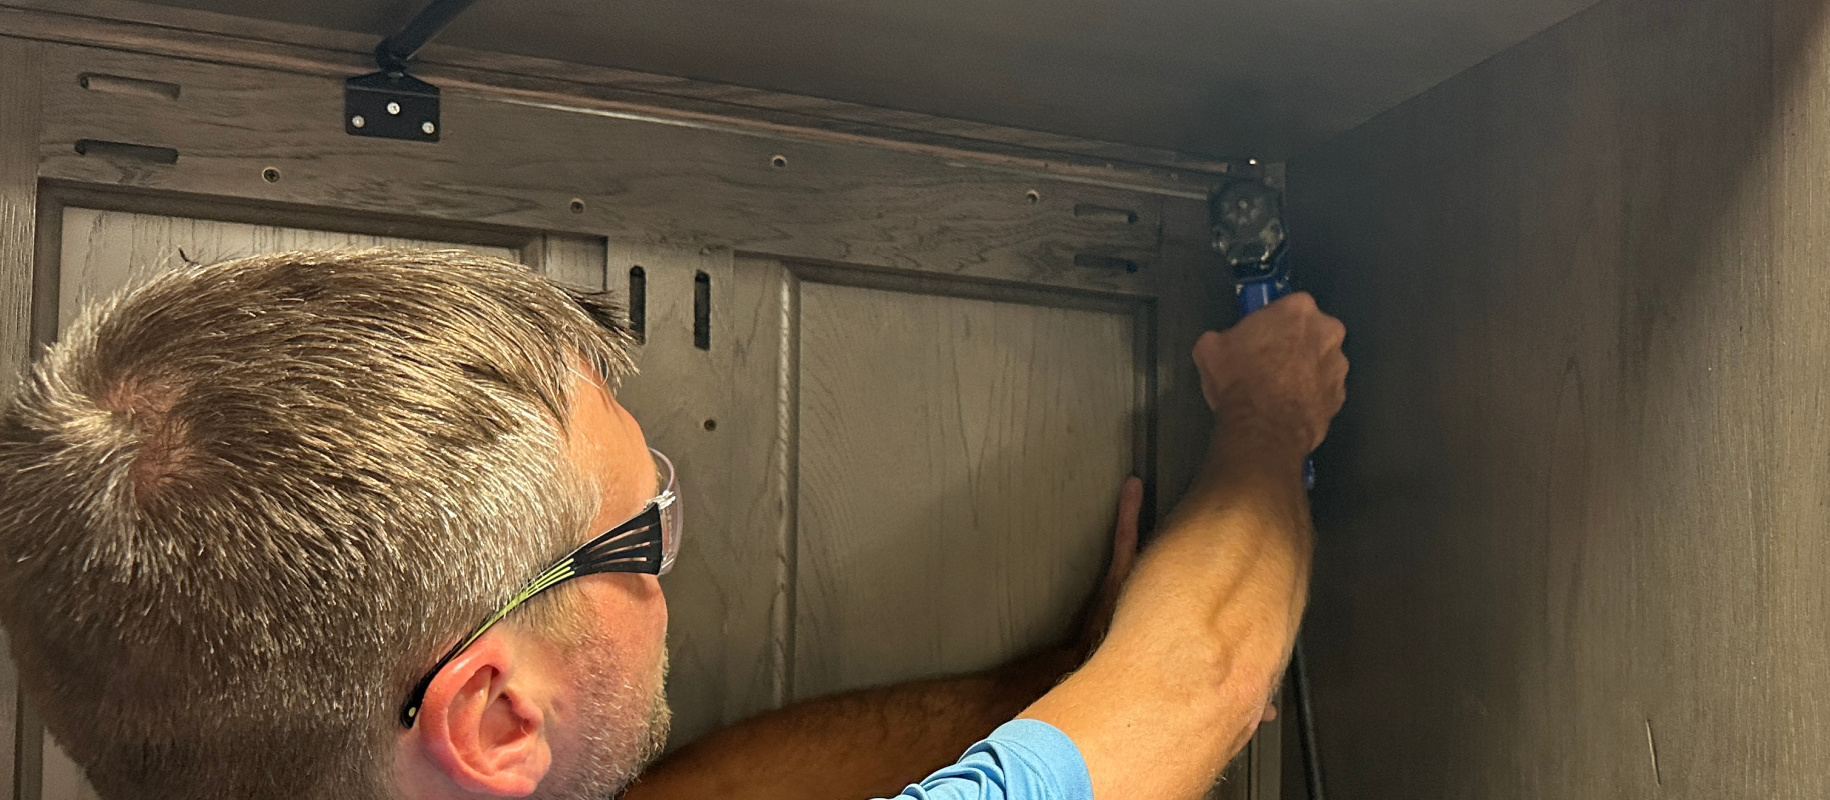 man building cabinets using drill, wearing safety glasses